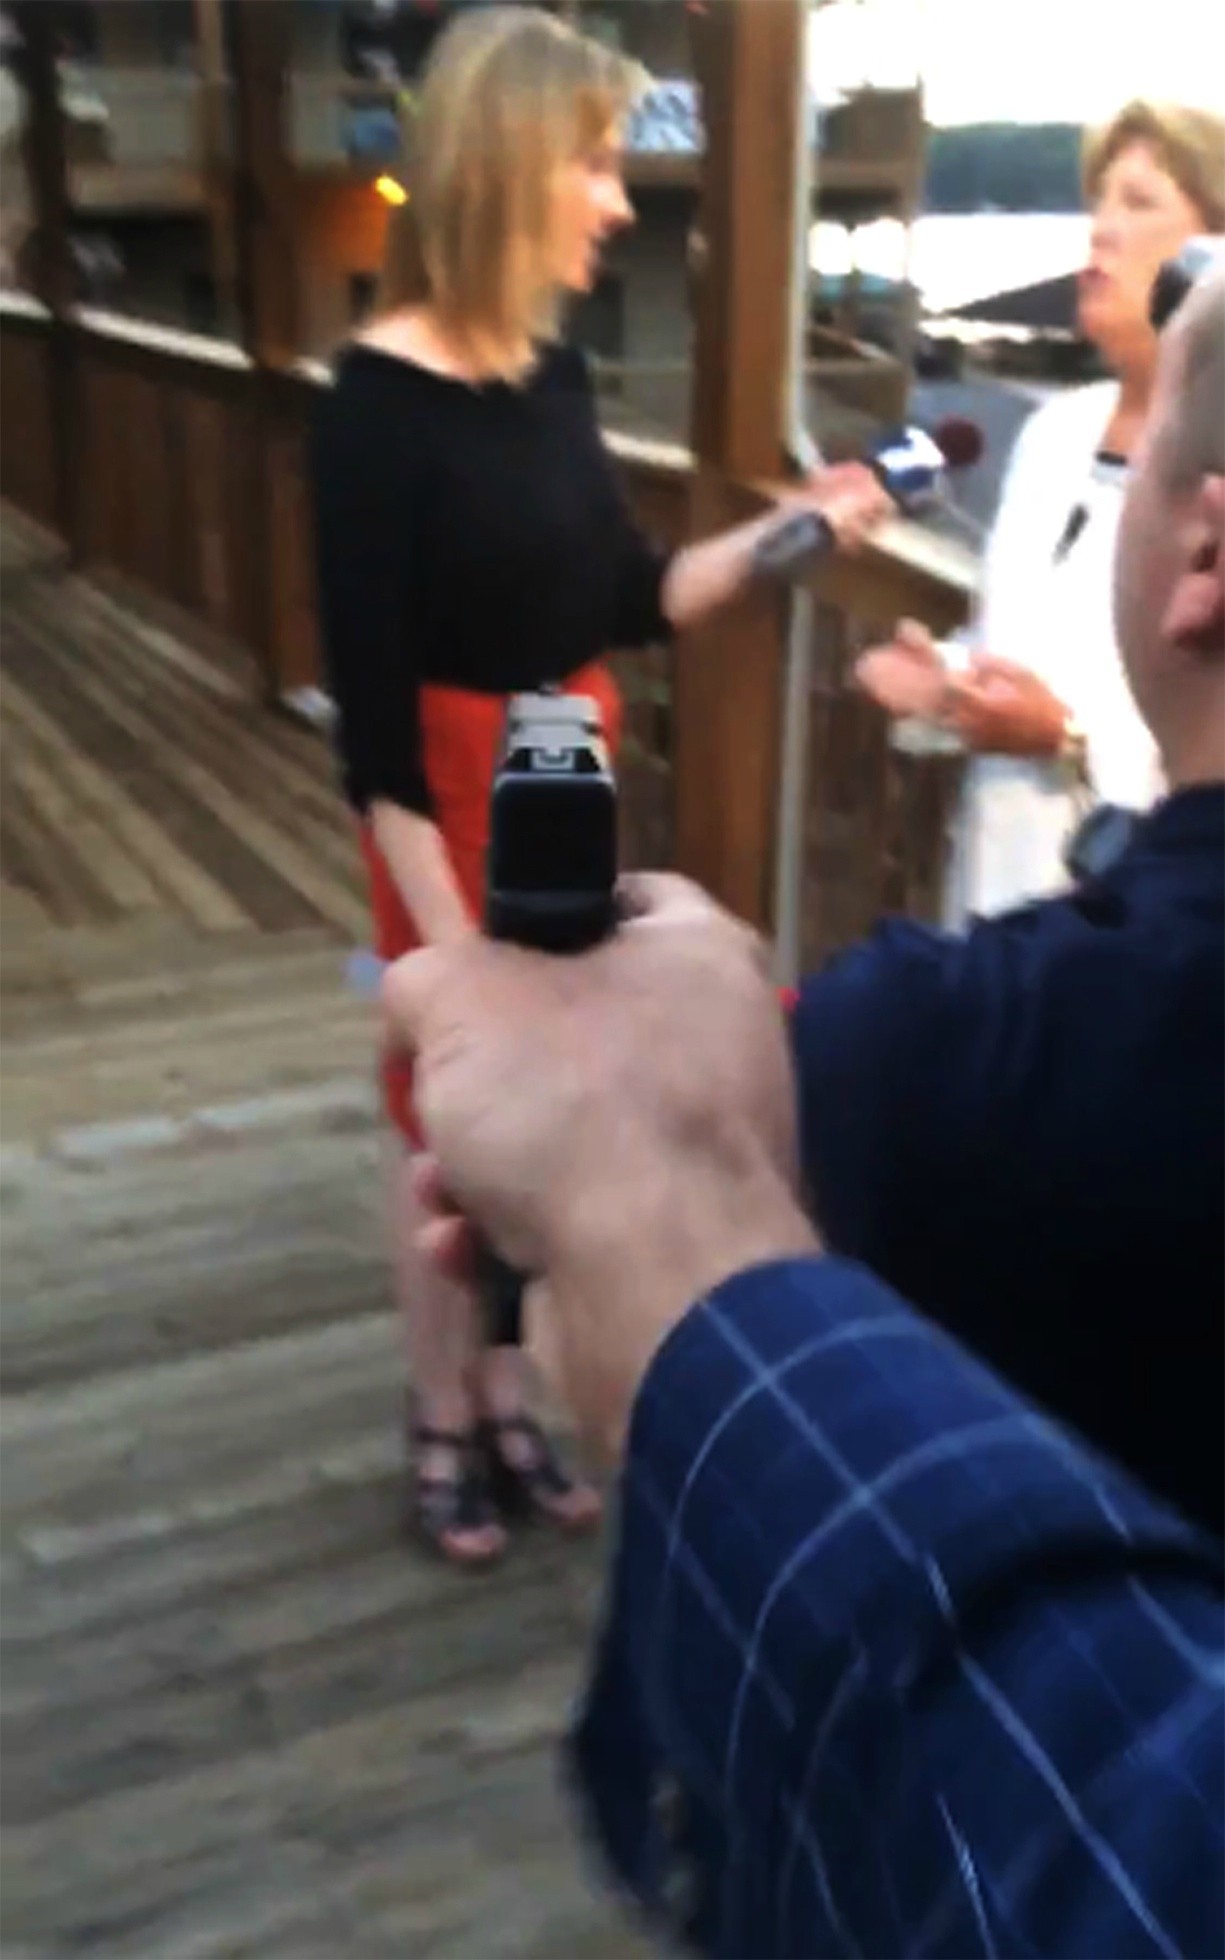 Lethal aim: a still from the video posted on Bryce Williams’s Twitter account of the moment he shot Alison Parker as she conducts a live on-air interview with Vicki Gardner.